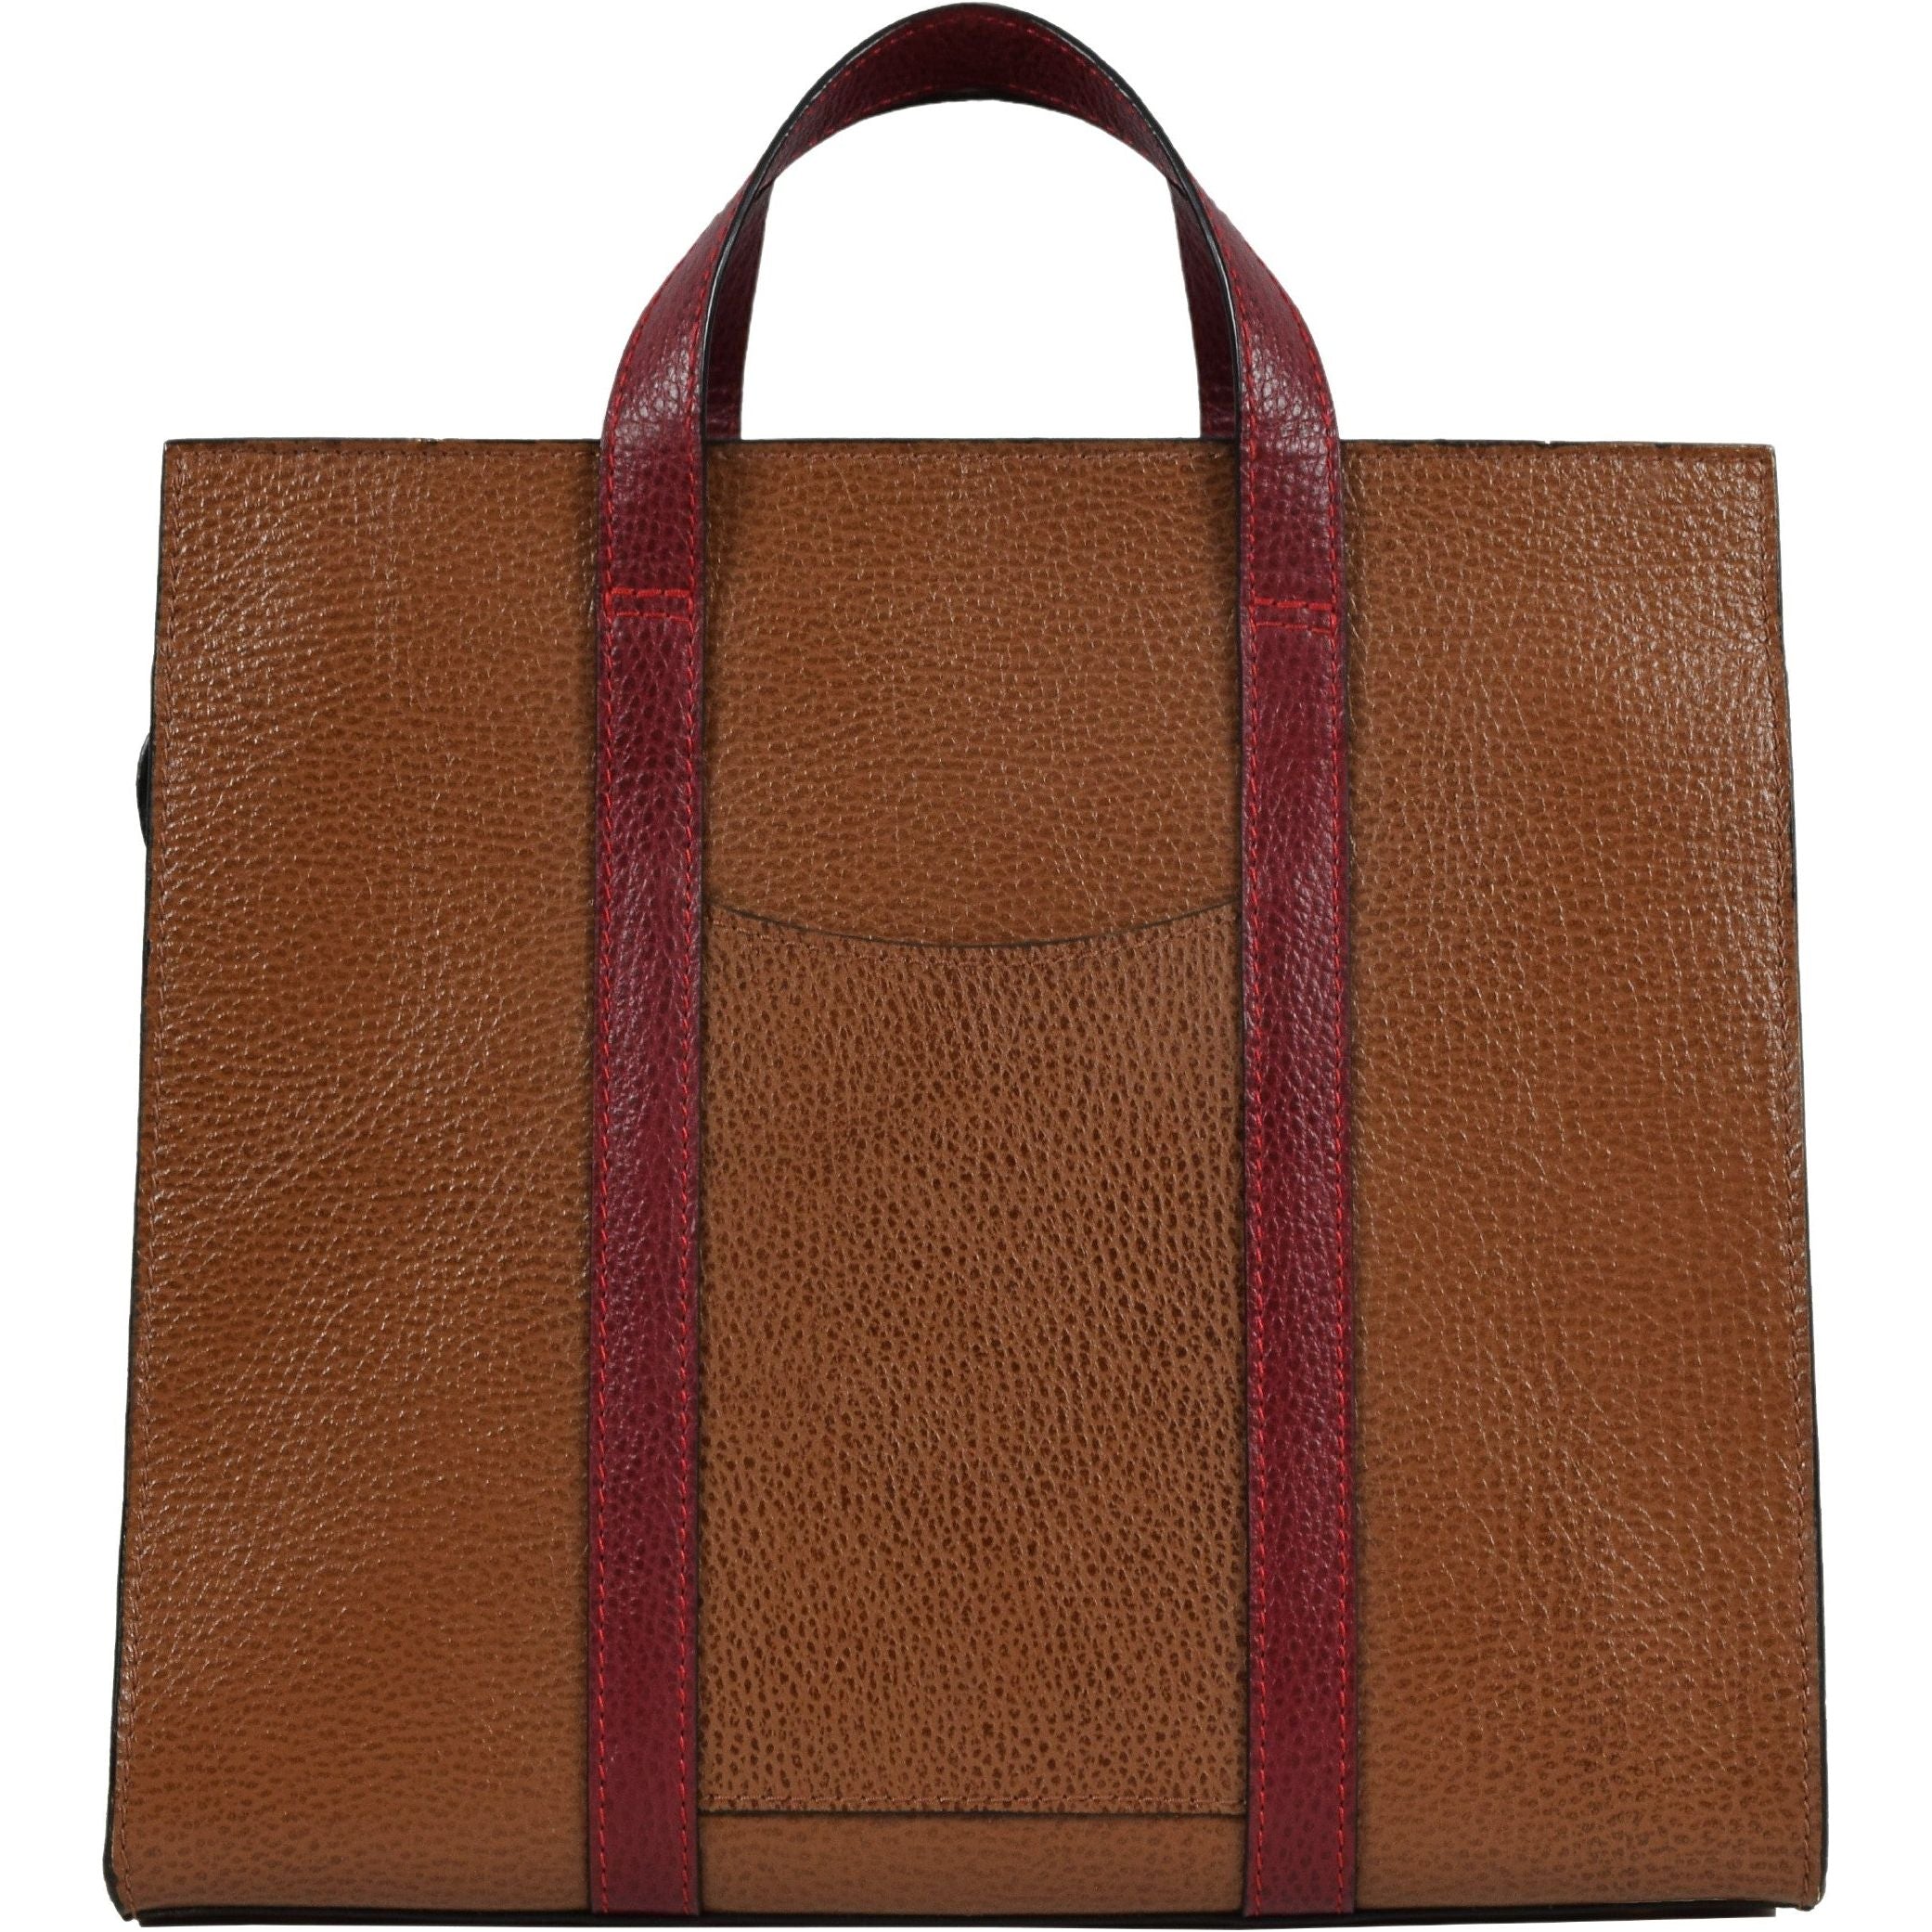 LAND Leather Goods: Premium Colombian Handmade Leather